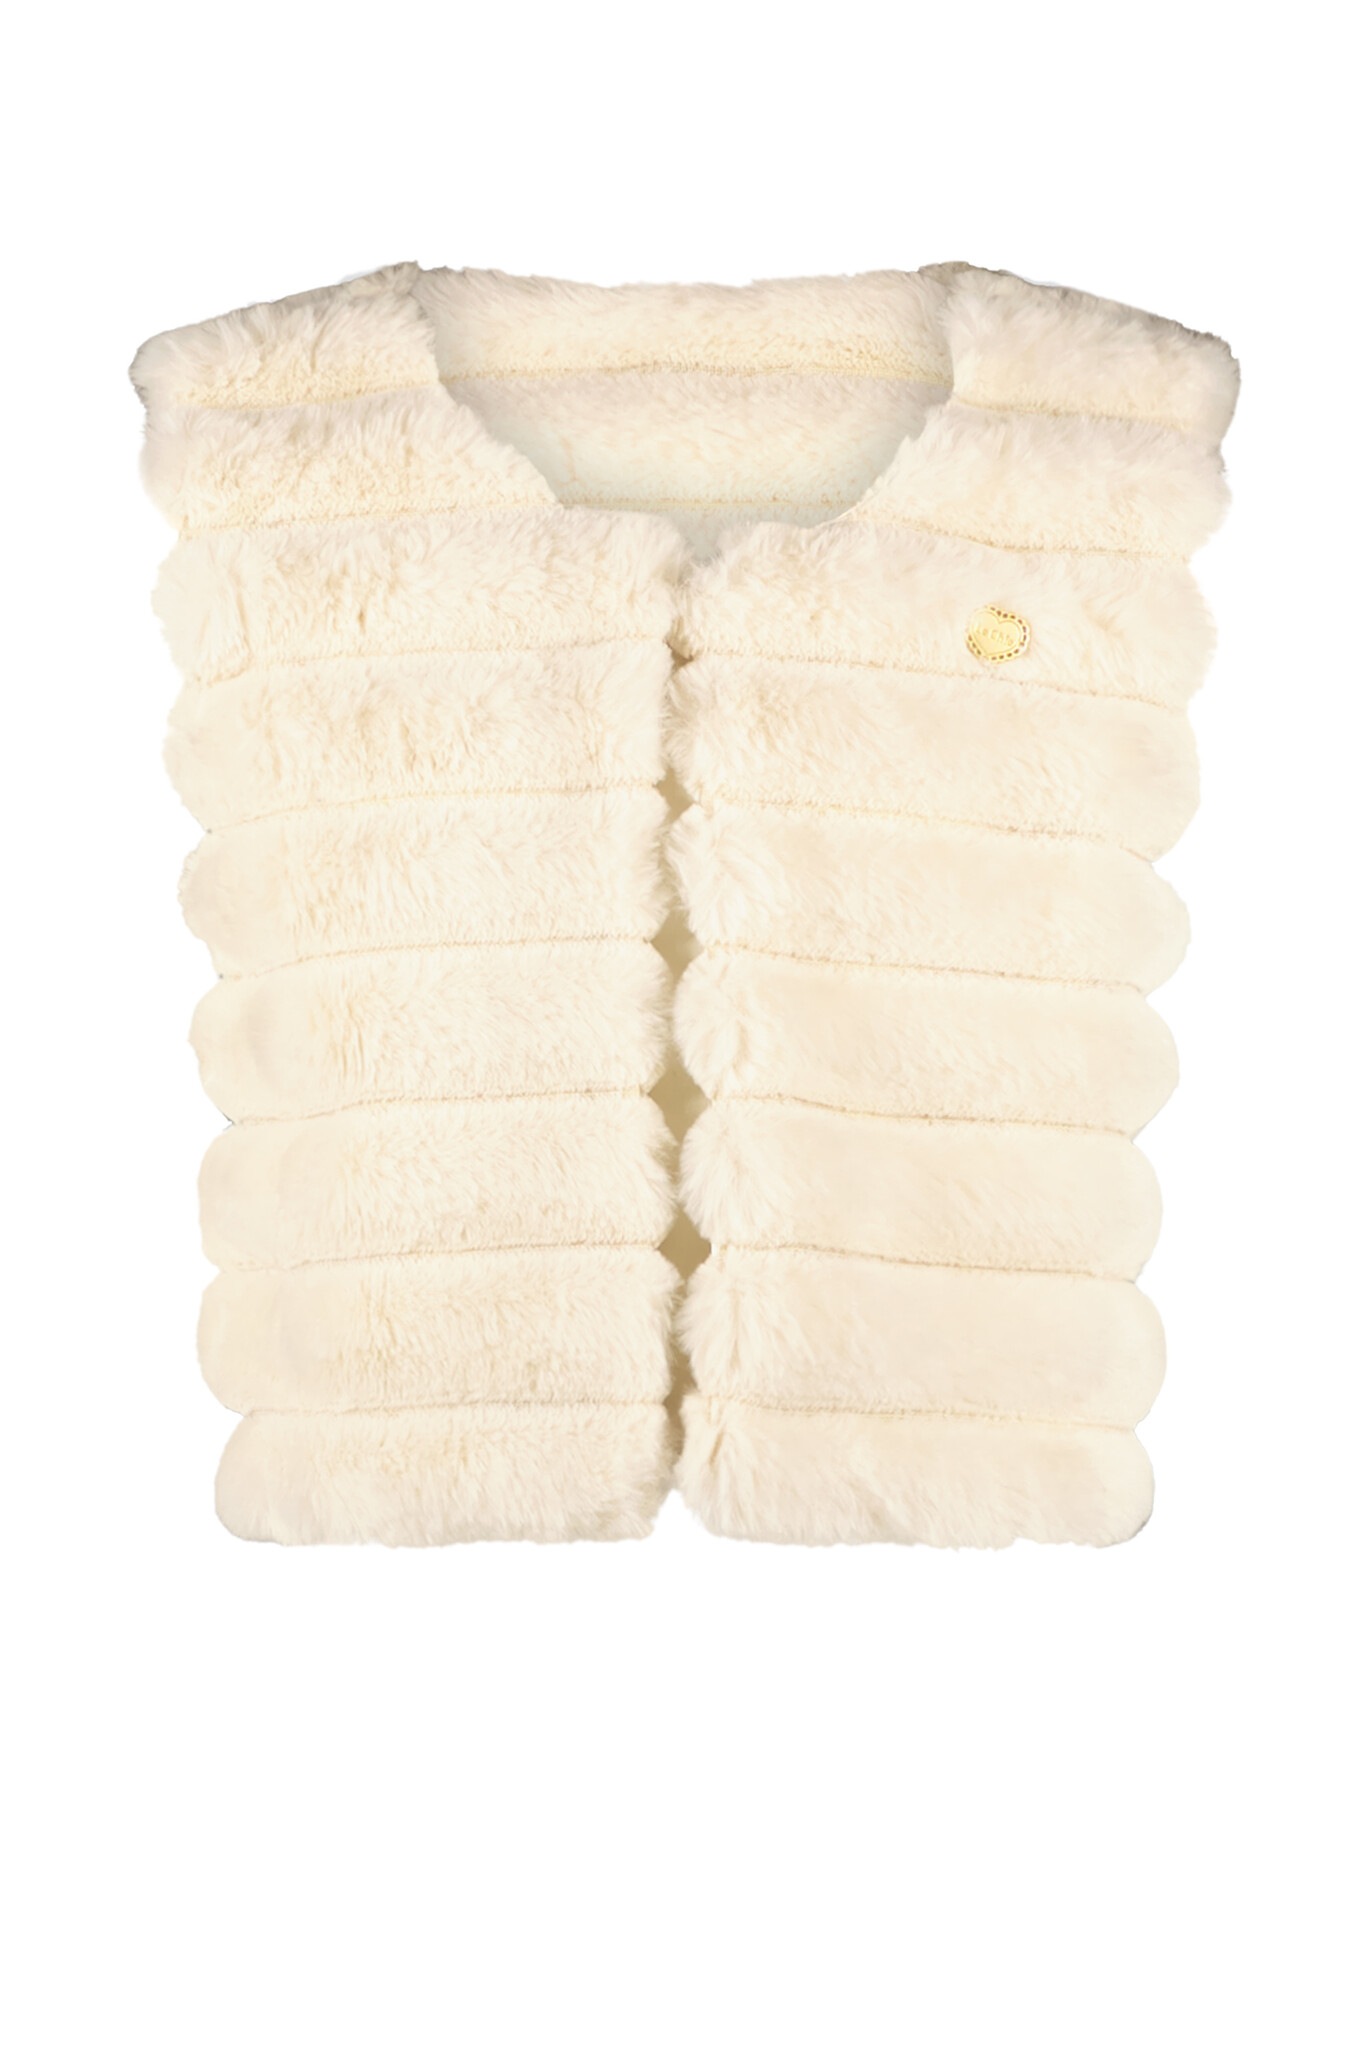 Le Chic C308-5106 Meisjes Gilet - Pearled Ivory - Maat 116